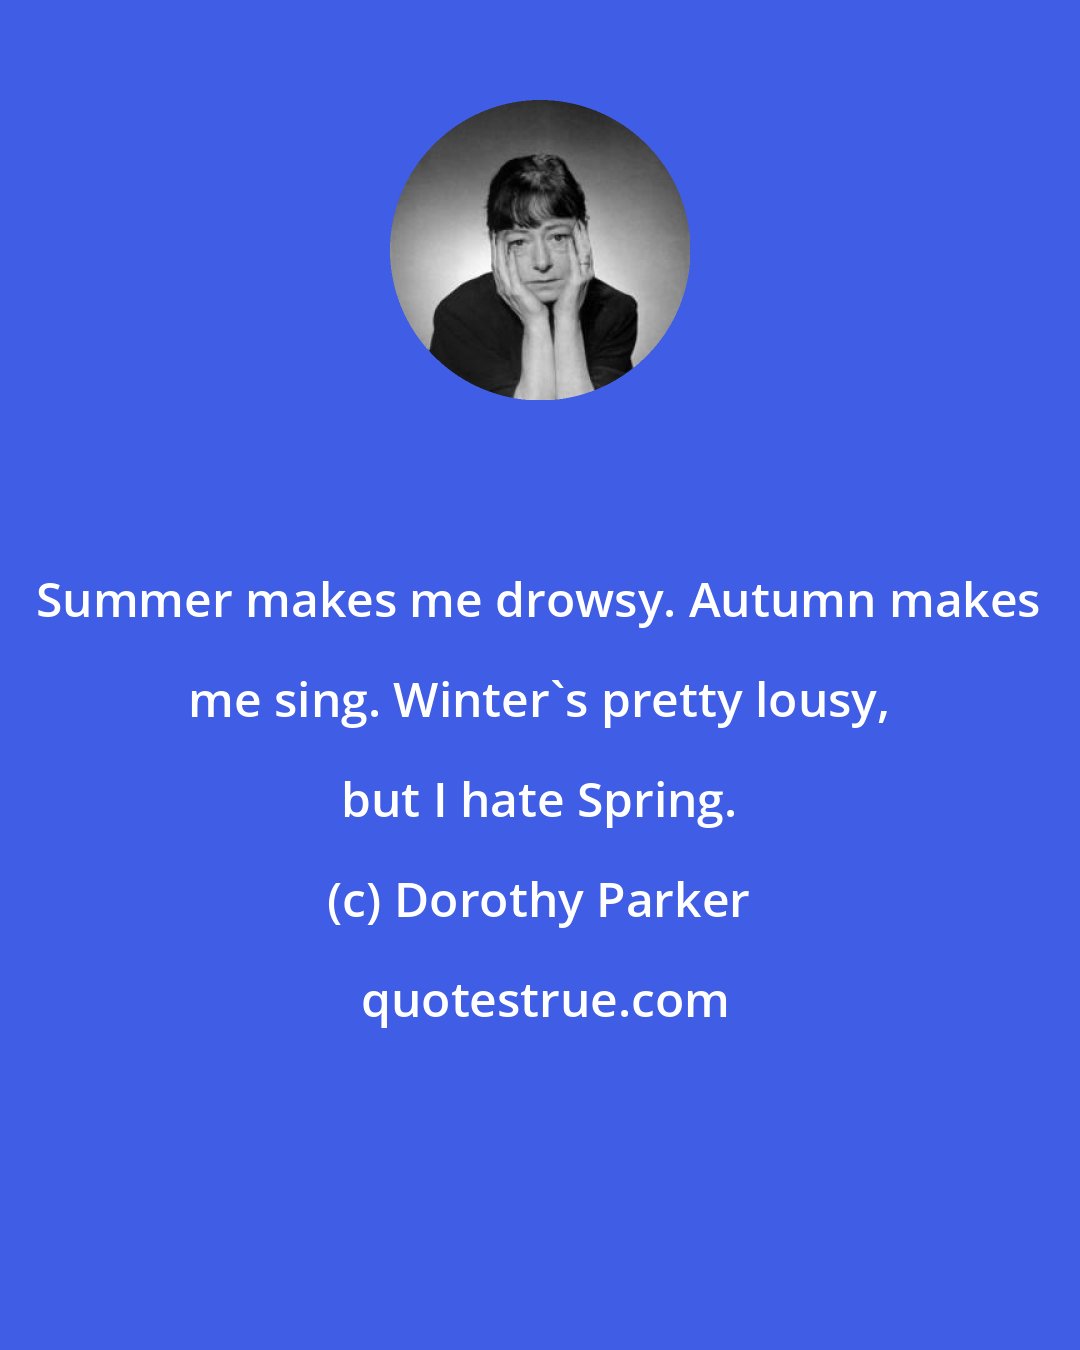 Dorothy Parker: Summer makes me drowsy. Autumn makes me sing. Winter's pretty lousy, but I hate Spring.